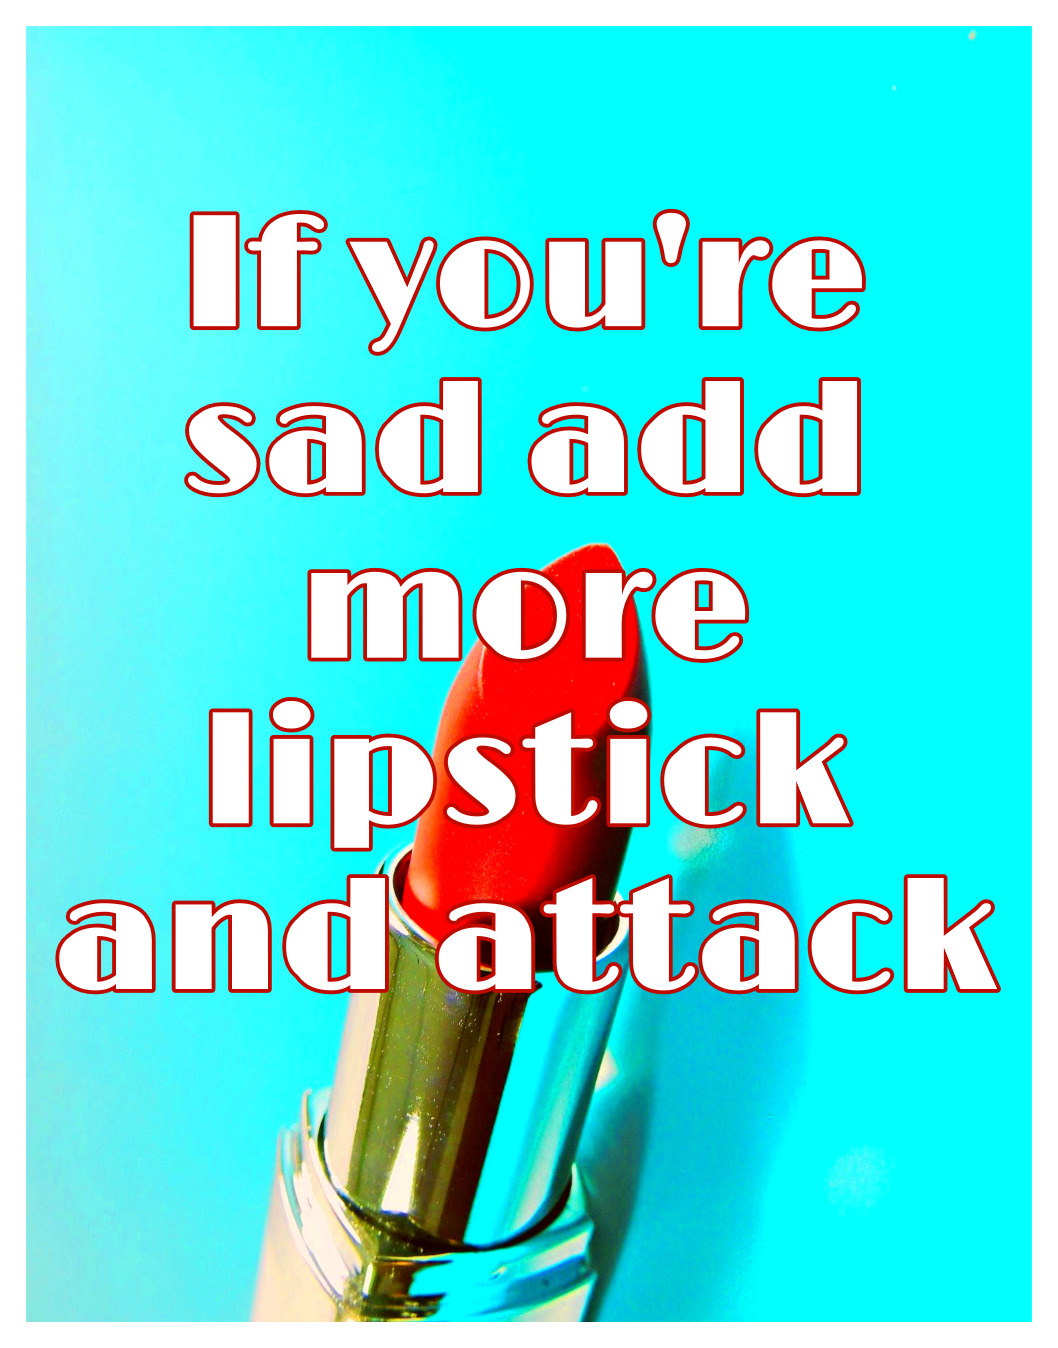 If you're sad, add more lipstick and attack. Chanel Quote